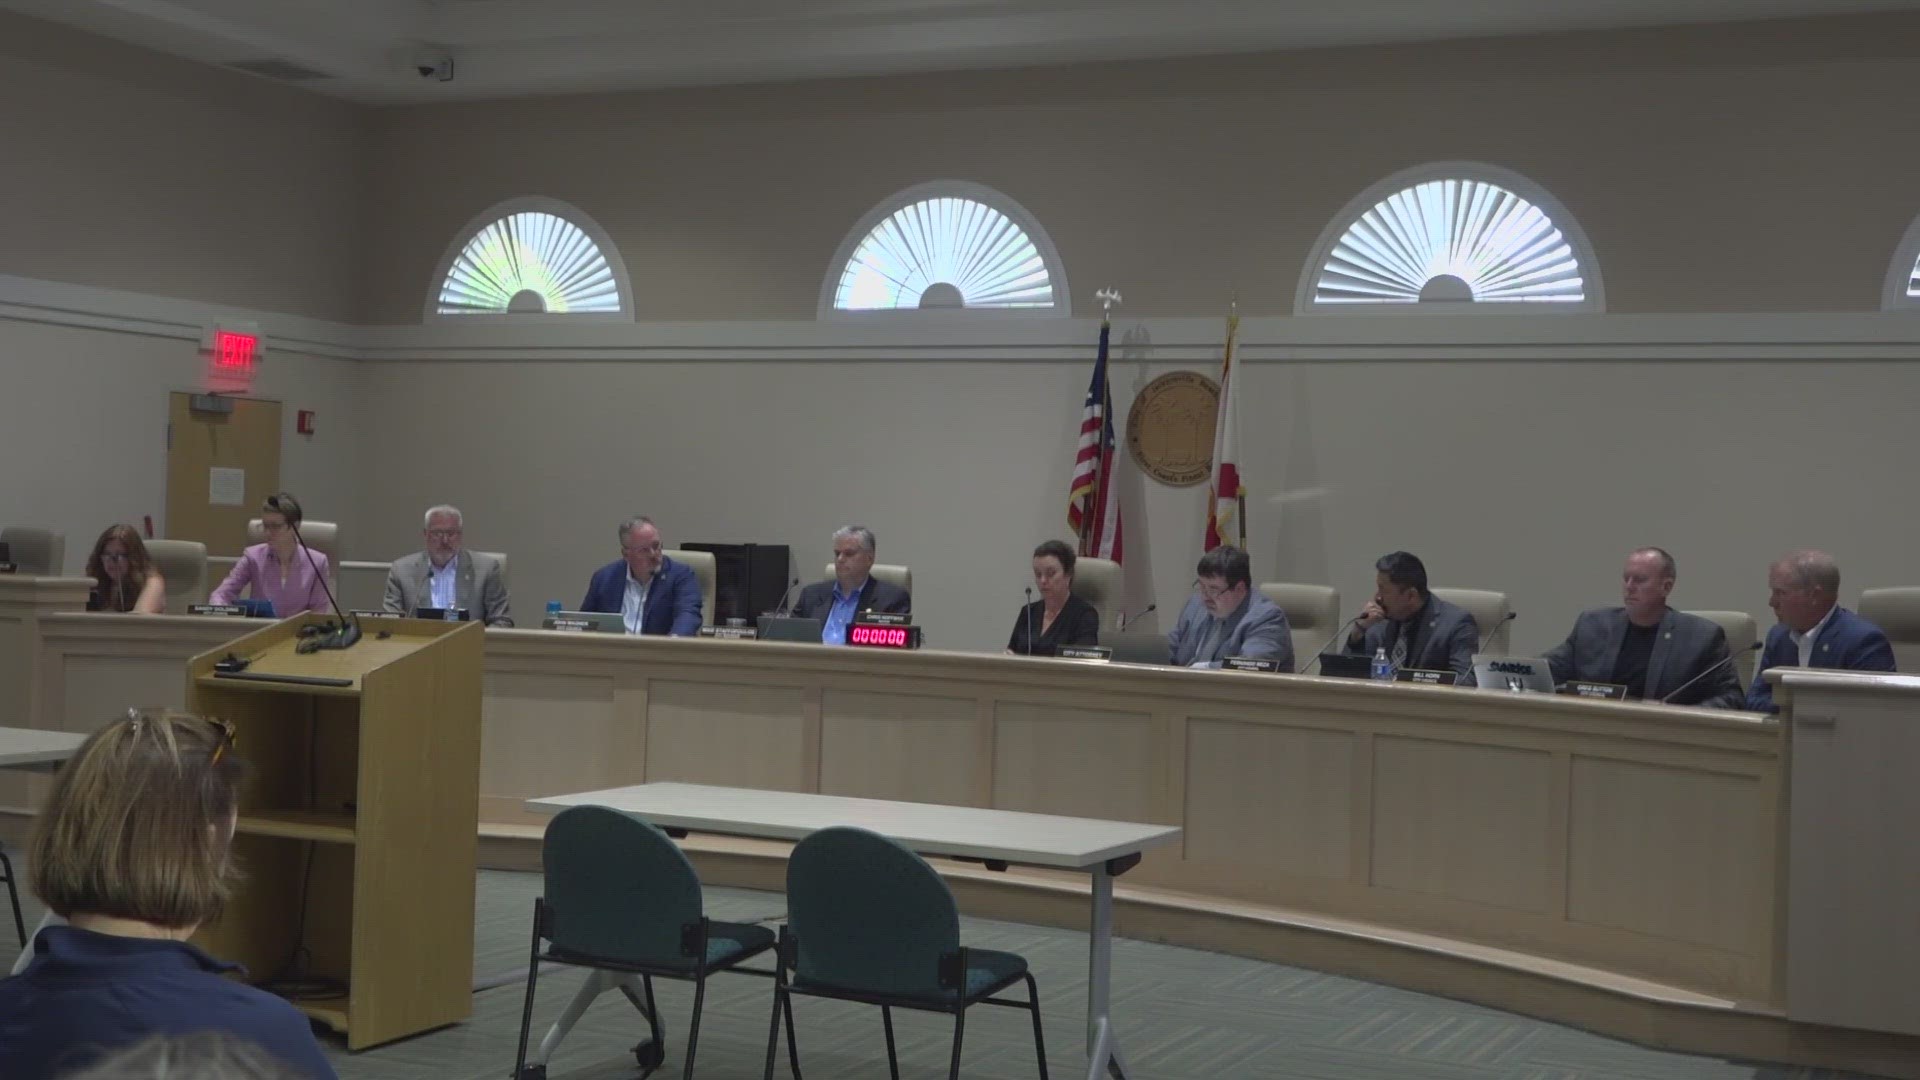 A unanimous vote tonight by Jacksonville Beach council members for putting a moratorium on issuing permits for special events or activities.